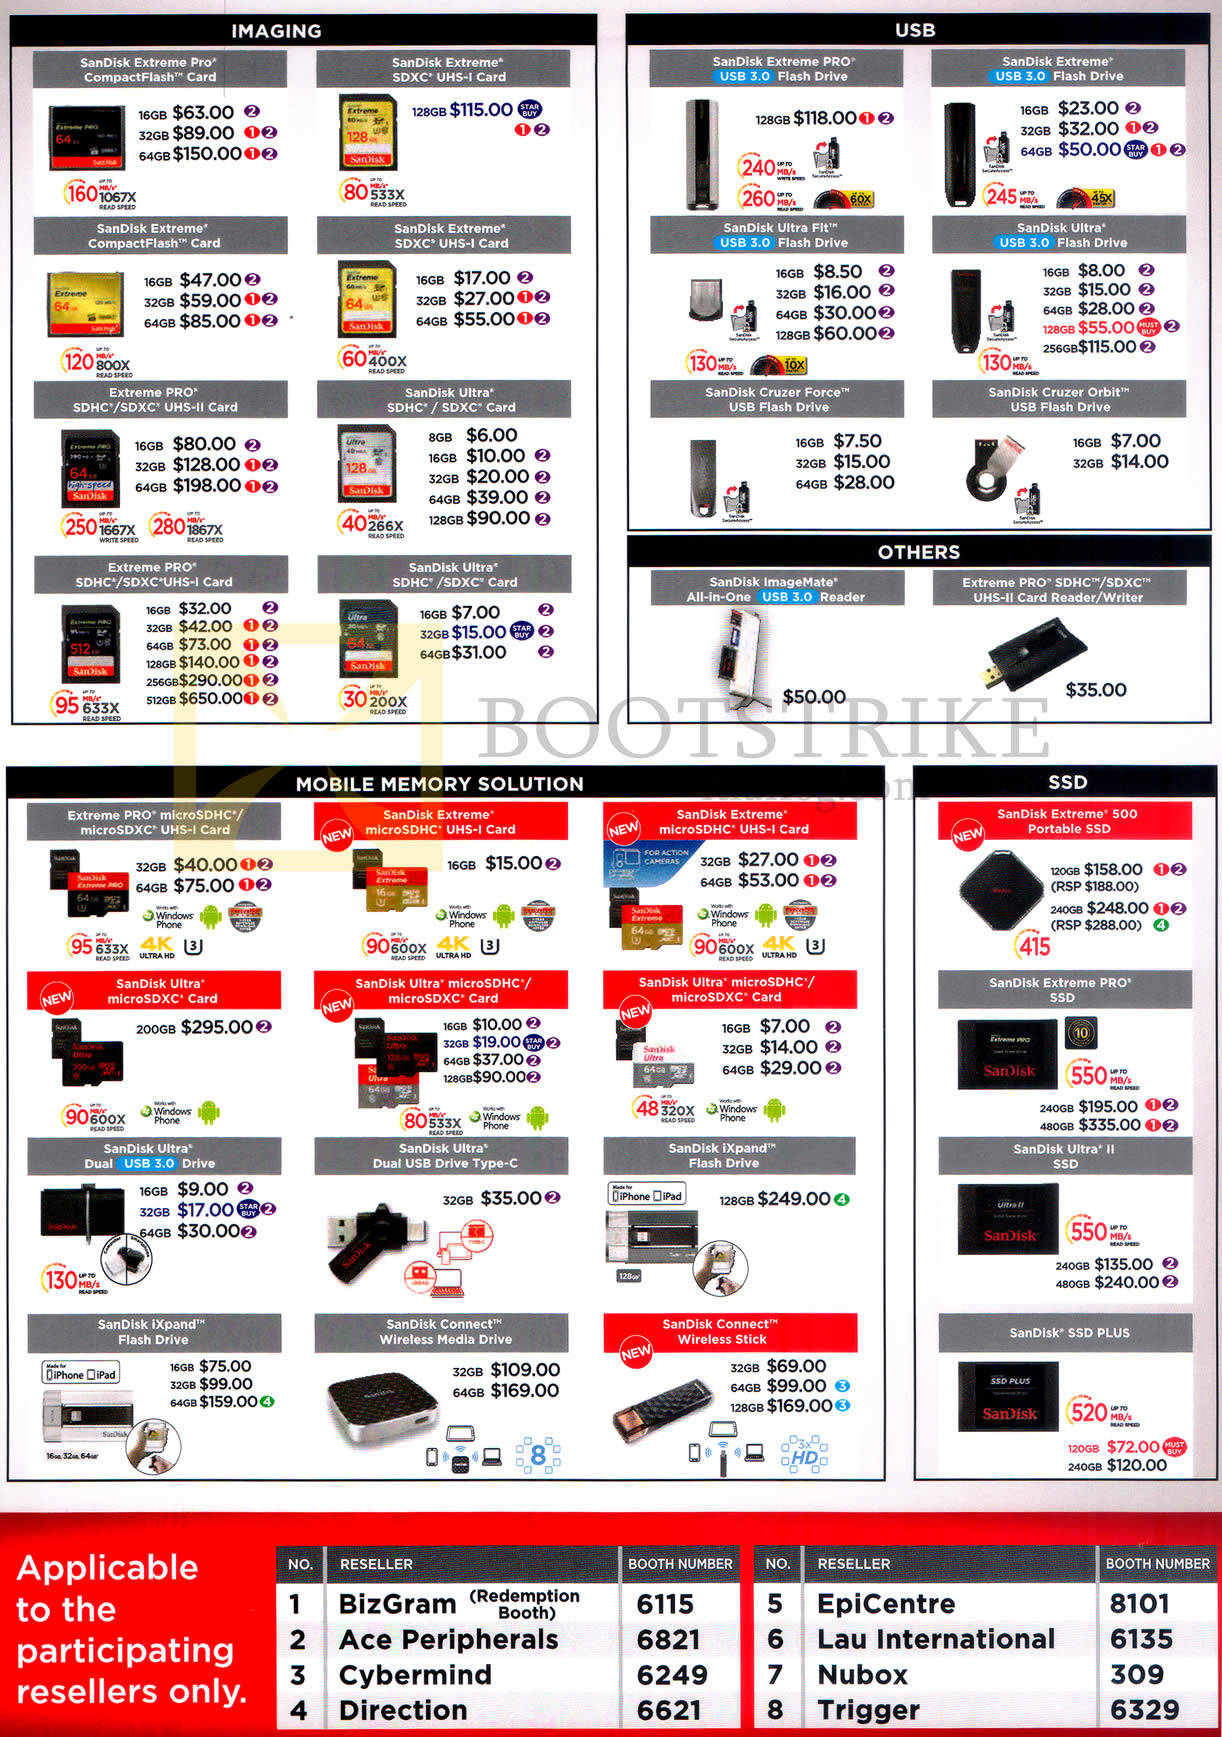 COMEX 2015 price list image brochure of Sandisk Imaging, USB, Mobile Memory Solution, SSD, Extreme PRo, SDXC, CompactFlash, Ultra, Ultra Fit, Cruzer Force, Cruzer Orbit, ImageMate, Extreme PRO, SSD Plus